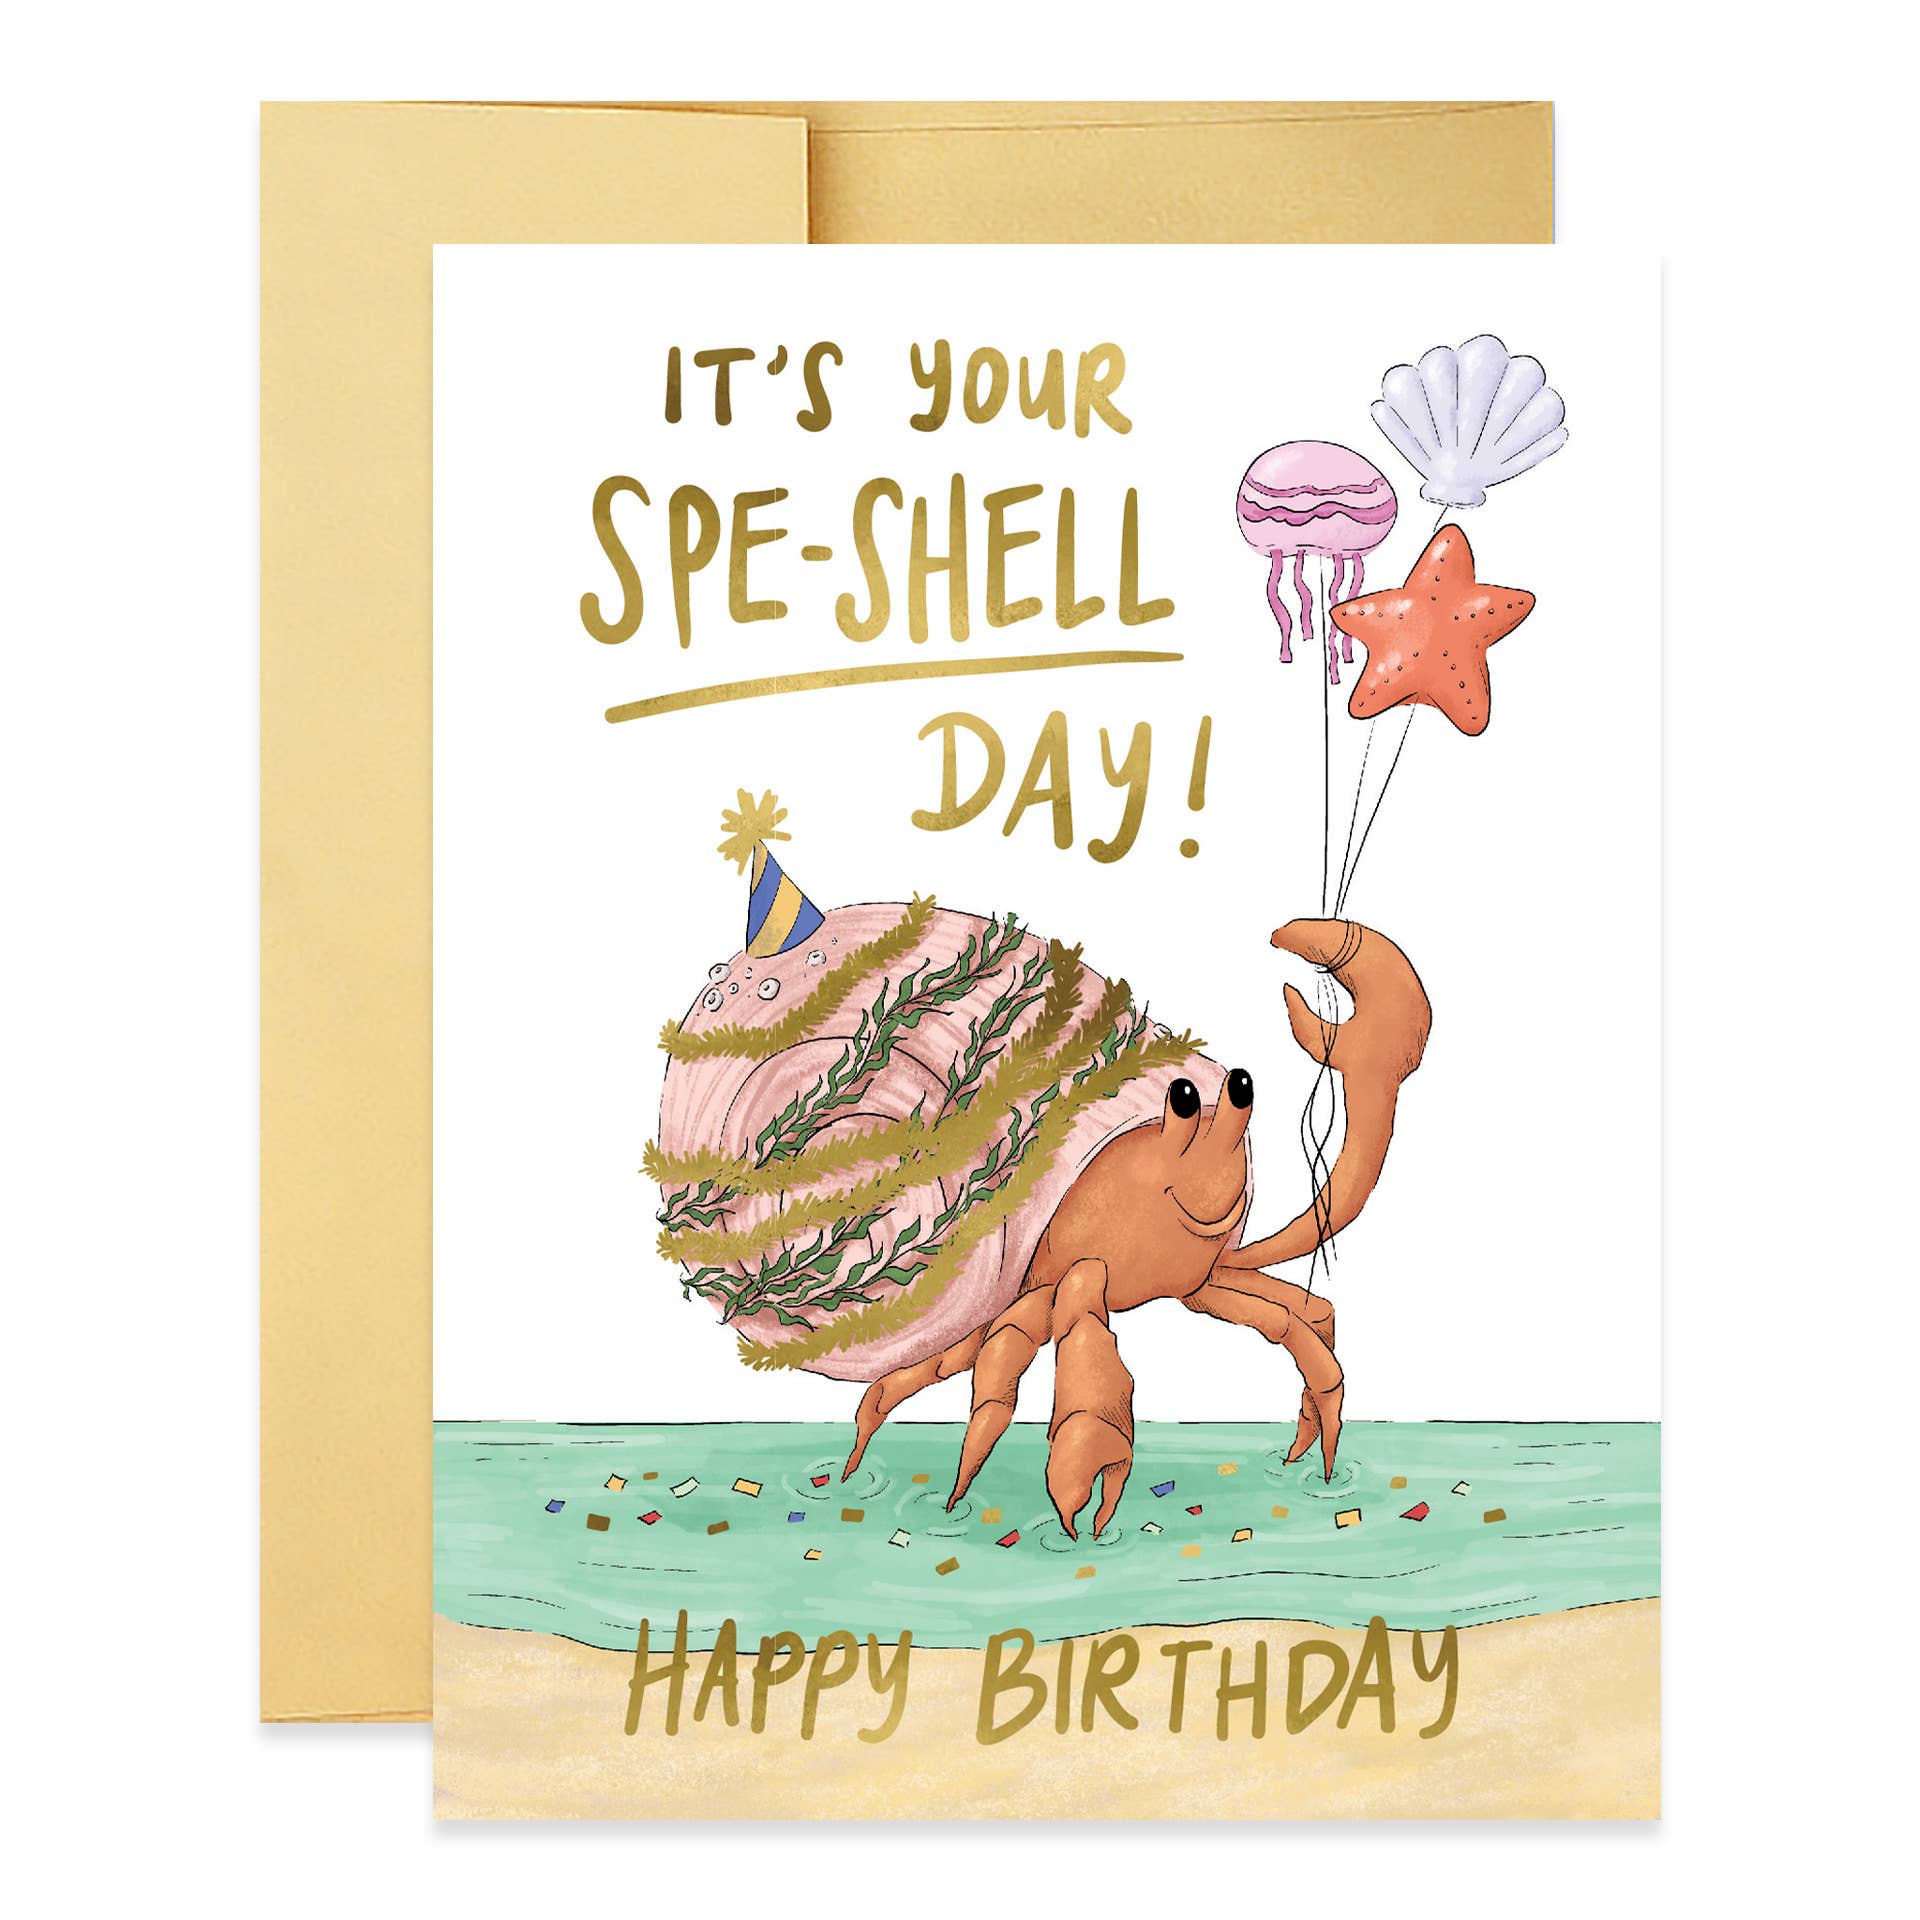 Your Spe-Shell Day